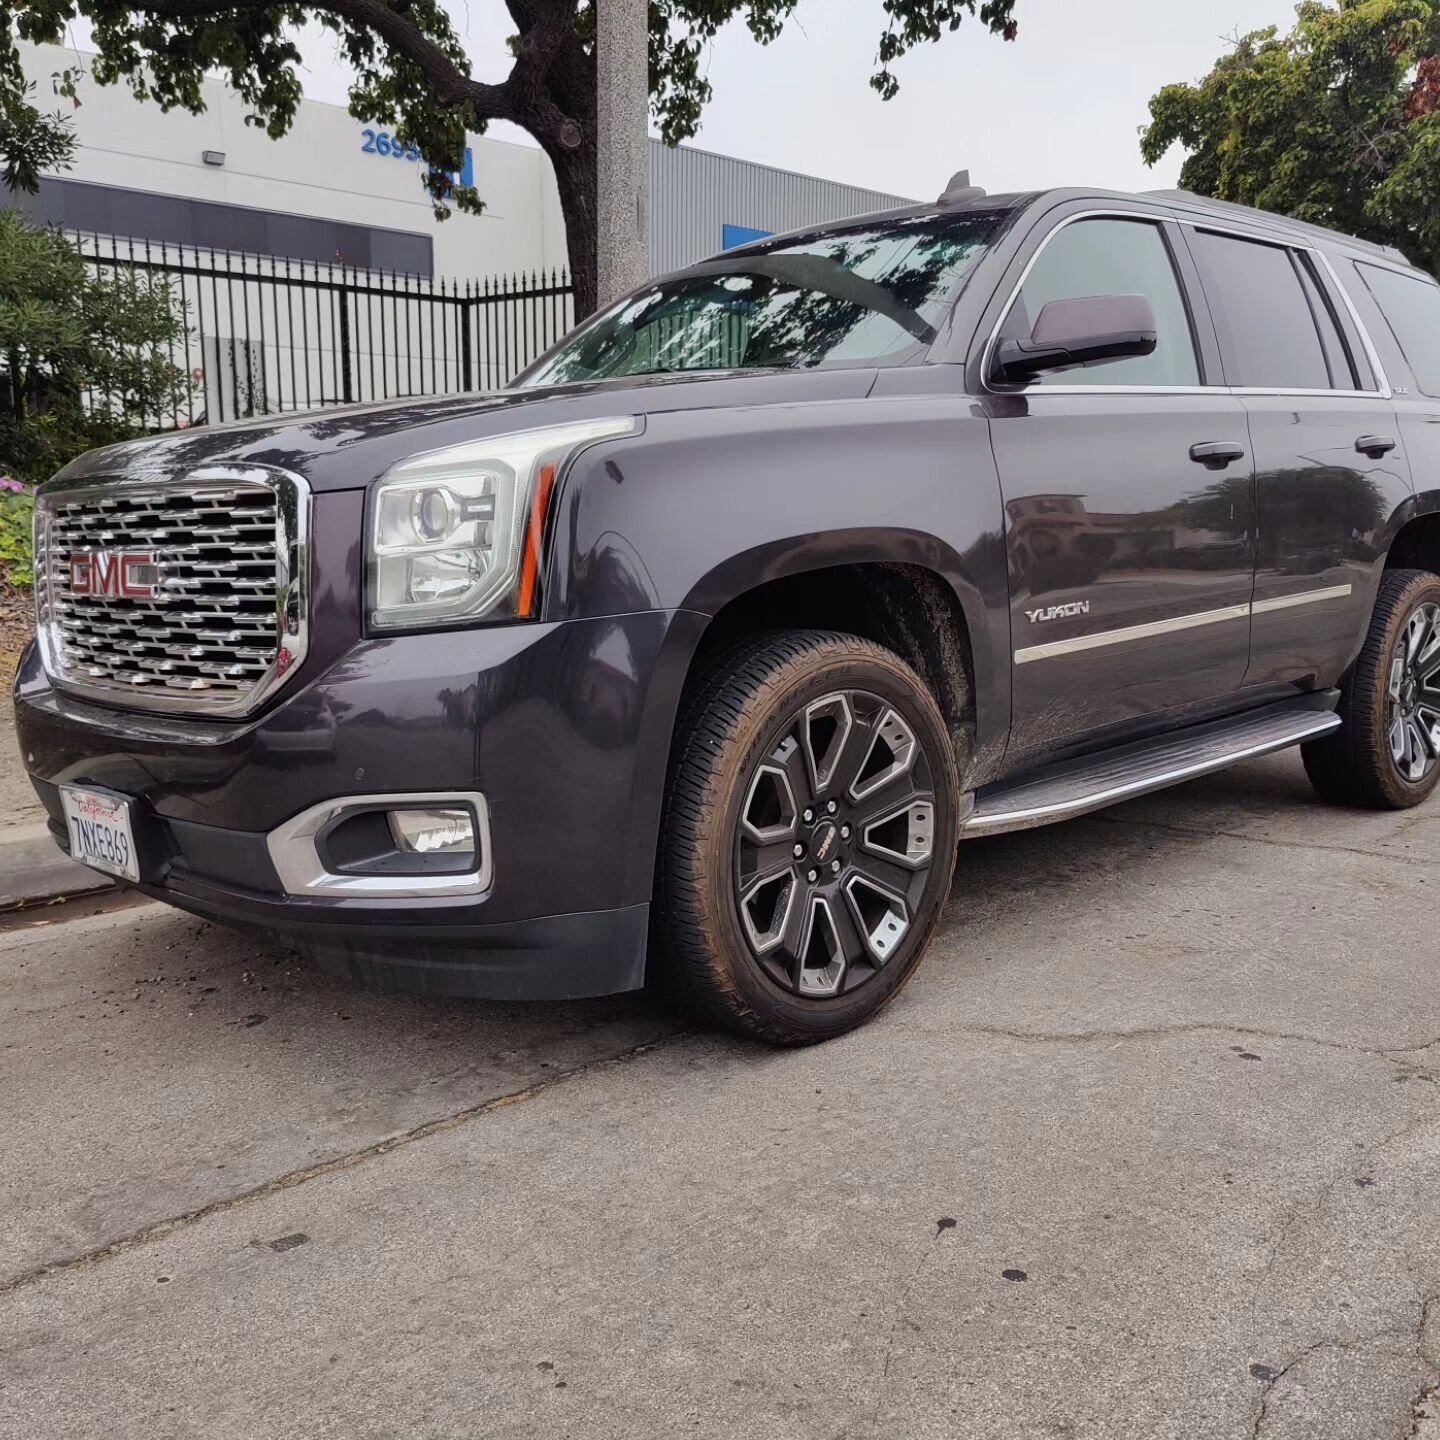 Basic Wash on a Yukon GMC. Completely mobile auto detailing &amp; car wash for your convenience, whether you're at work or you're at home I come to you and give your car the care it deserves. 
.
.
.
.
.
.
.
.
.
#yukon #gmc #detailer #carwash #beforea